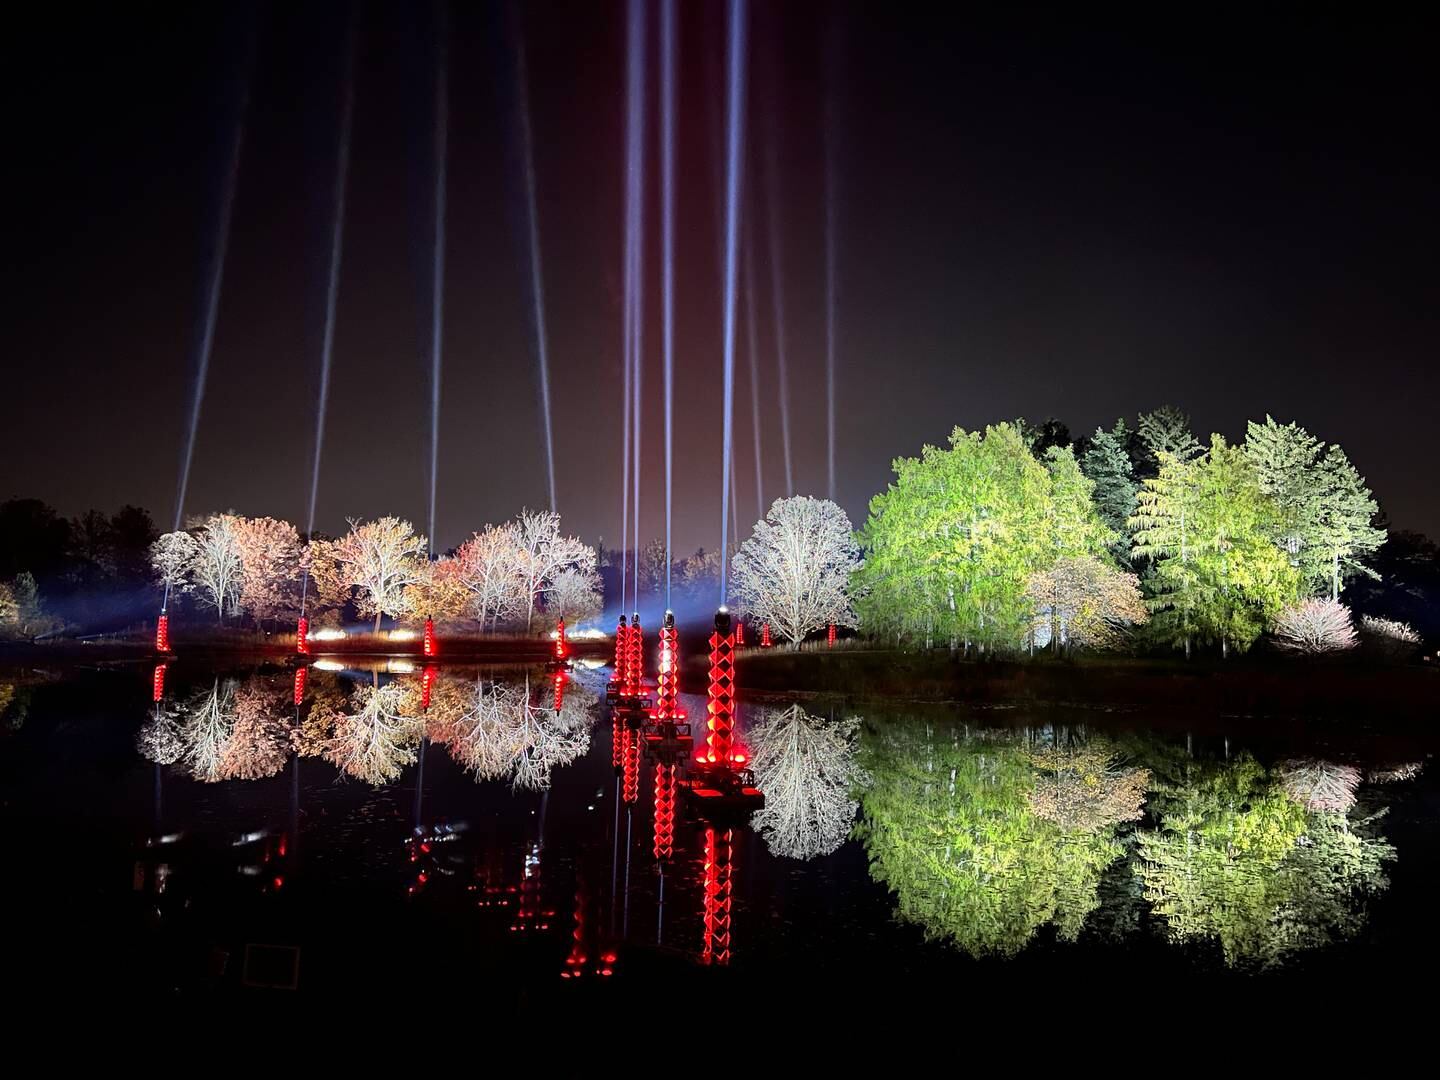 Radiant Reflections is one of the new attractions of Illumination: Tree Lights at The Morton Arboretum.